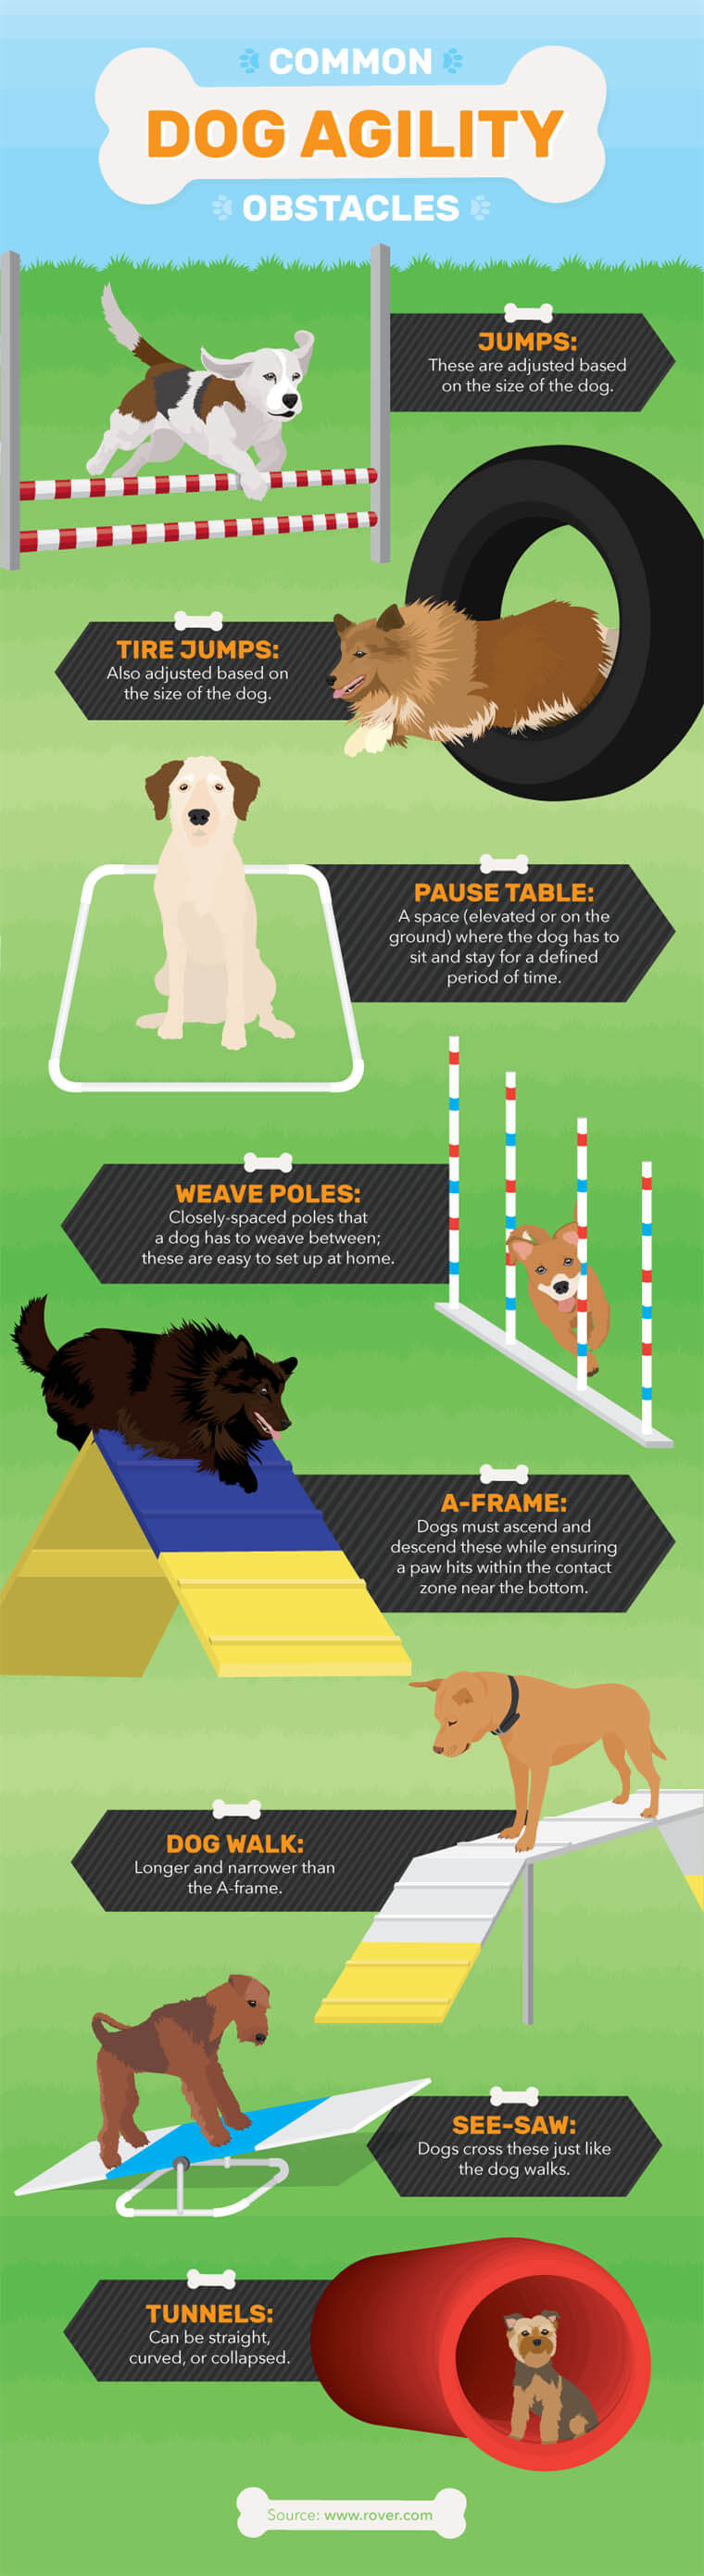 10 FUN GAMES TO PLAY WITH YOUR DOG